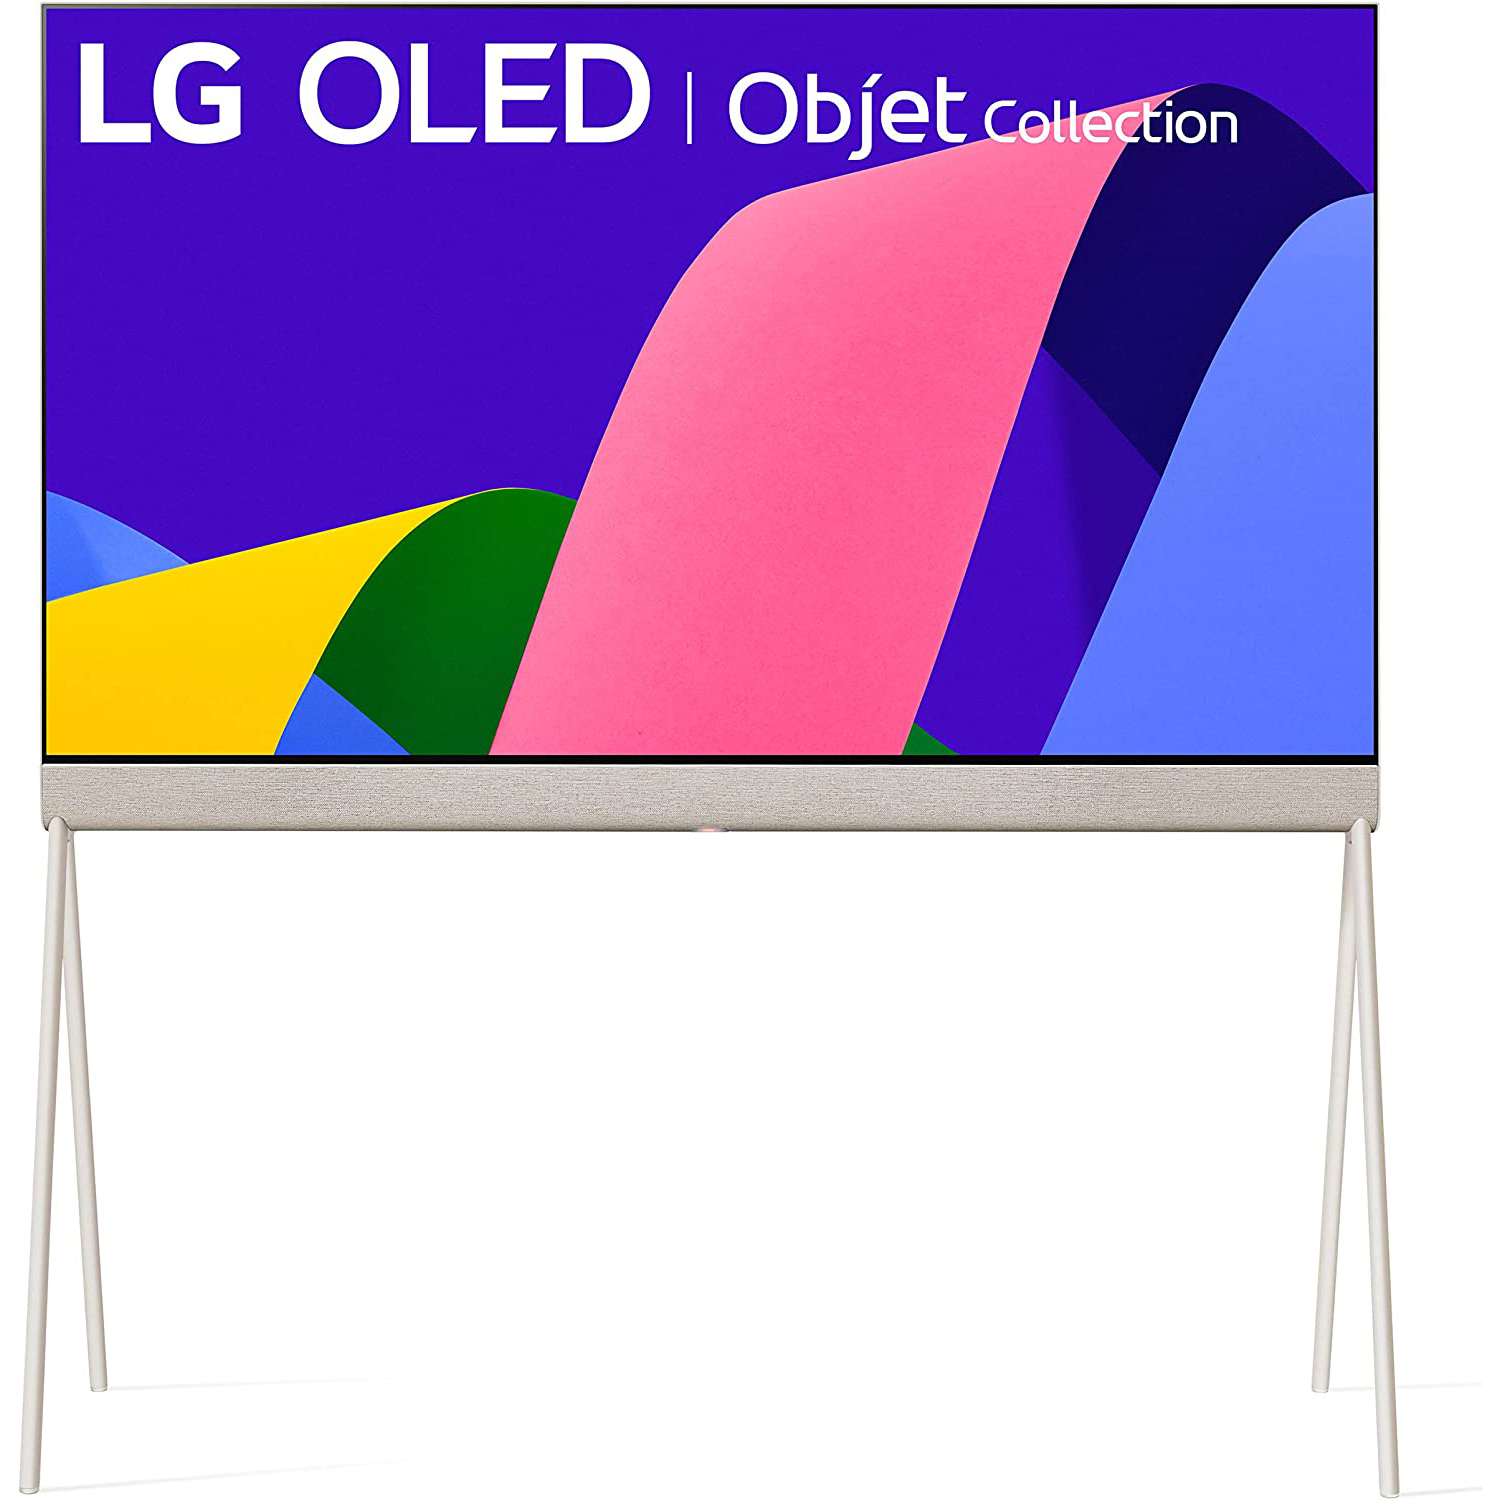 Photos - Television LG OLED Objet Collection Pose Series 48 inch 4K UHD Smart webOS TV 48LX1QP 